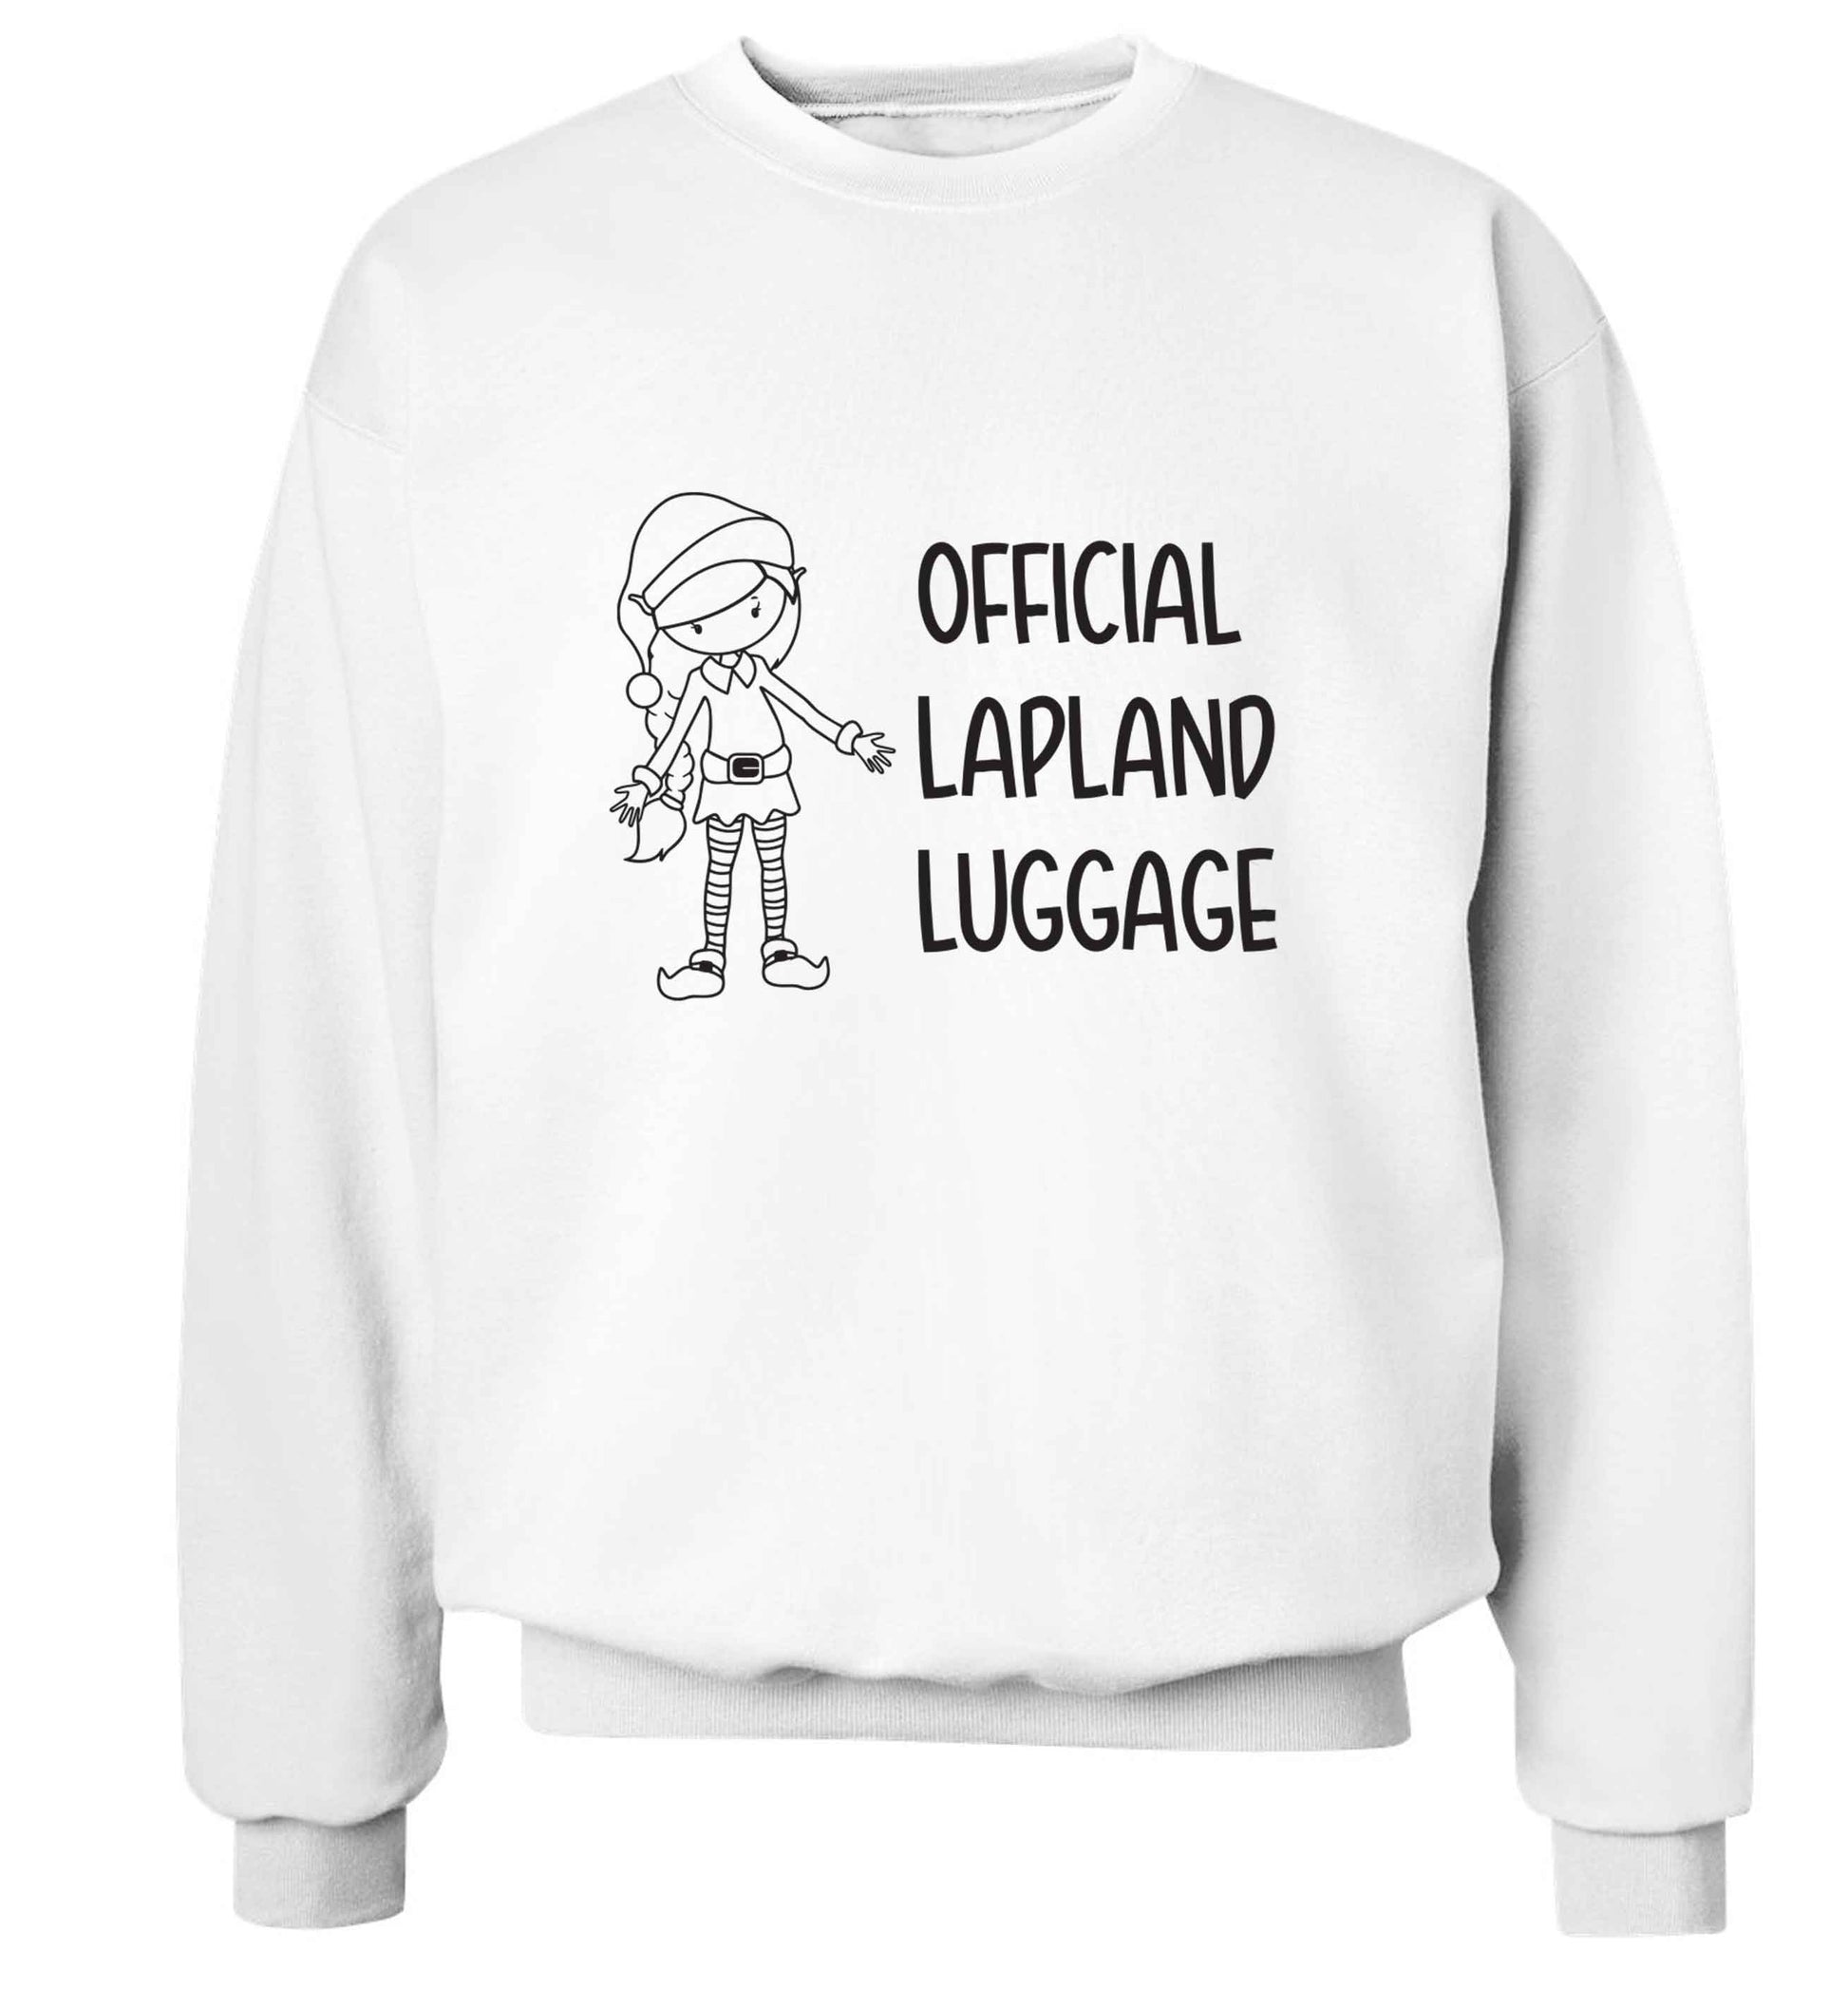 Official lapland luggage - Elf snowflake adult's unisex white sweater 2XL